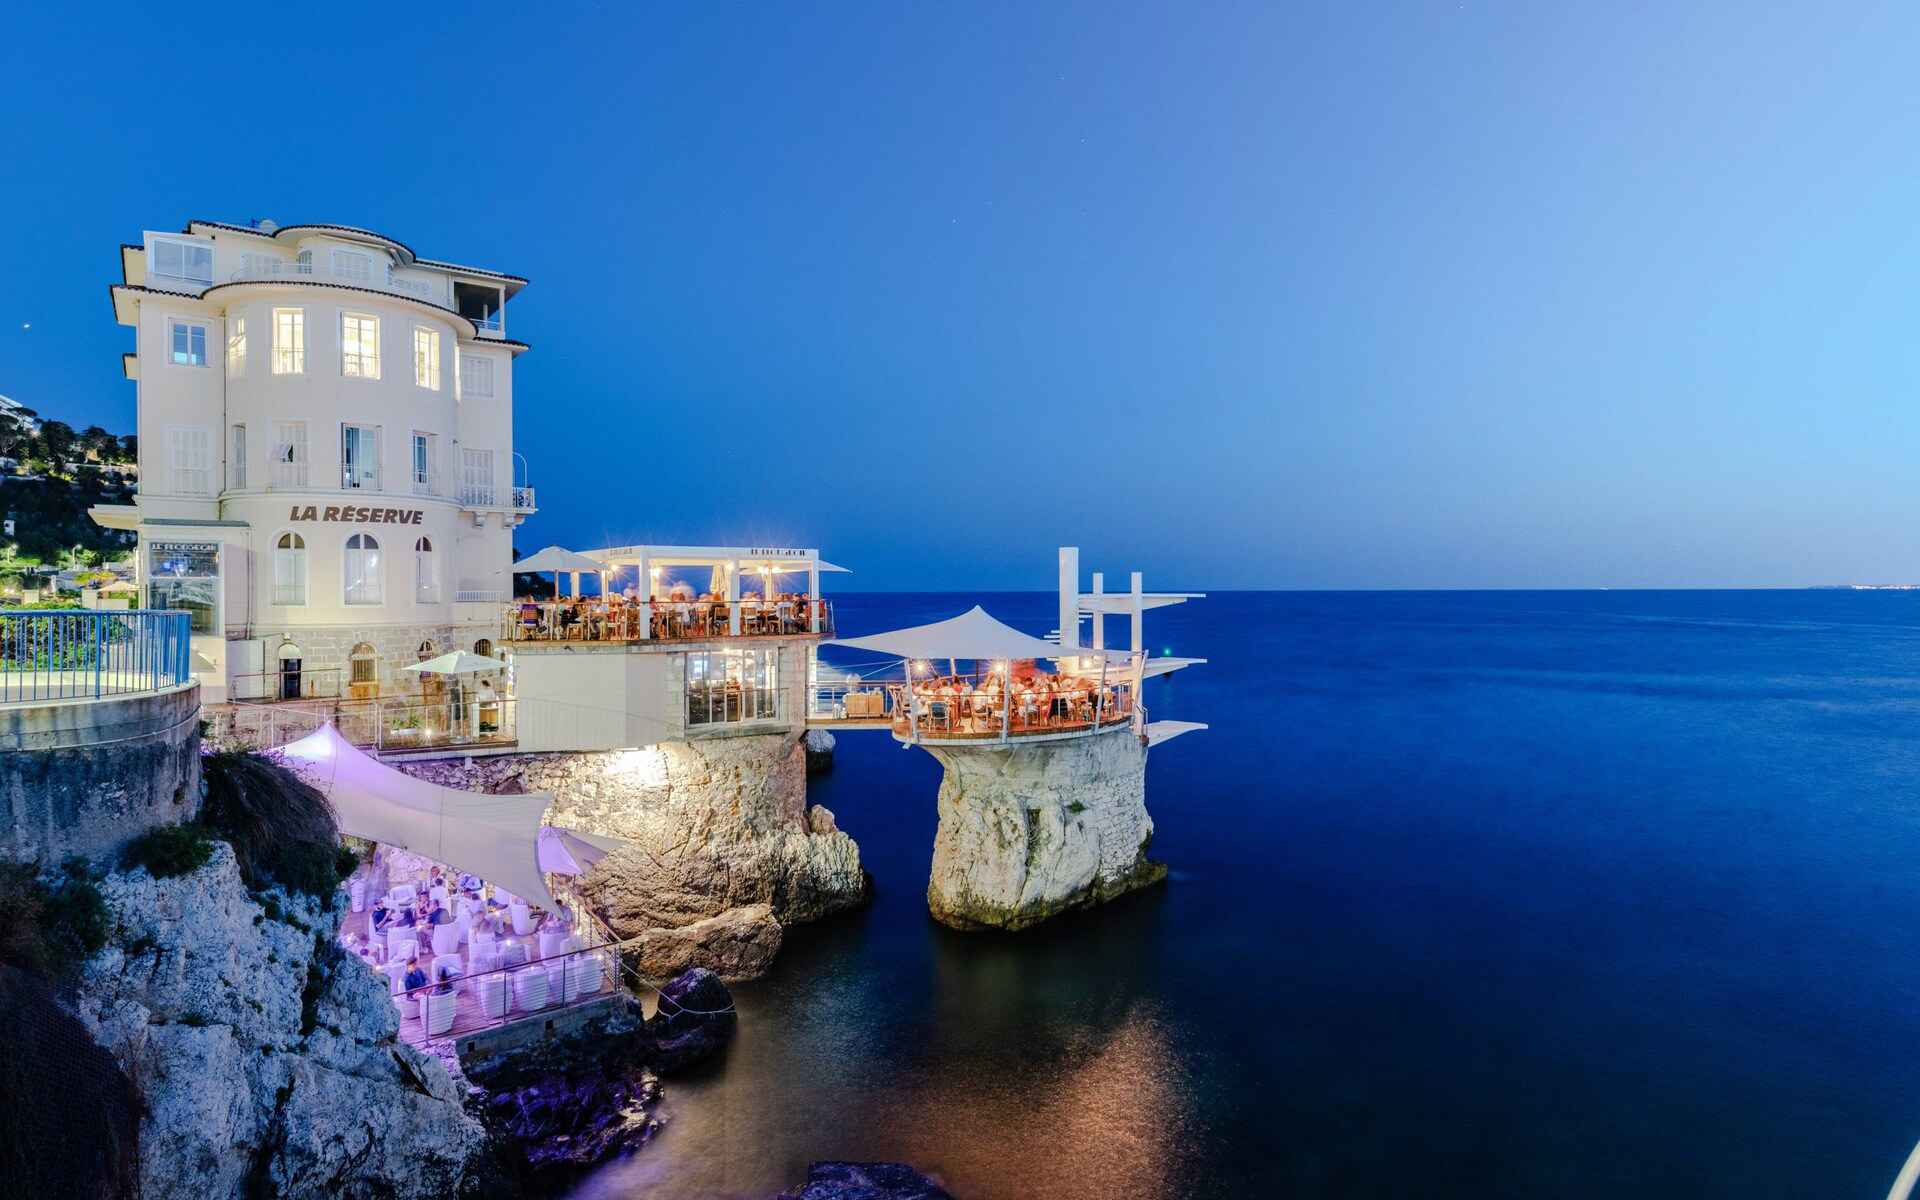 The best nightlife and bars on the French Riviera